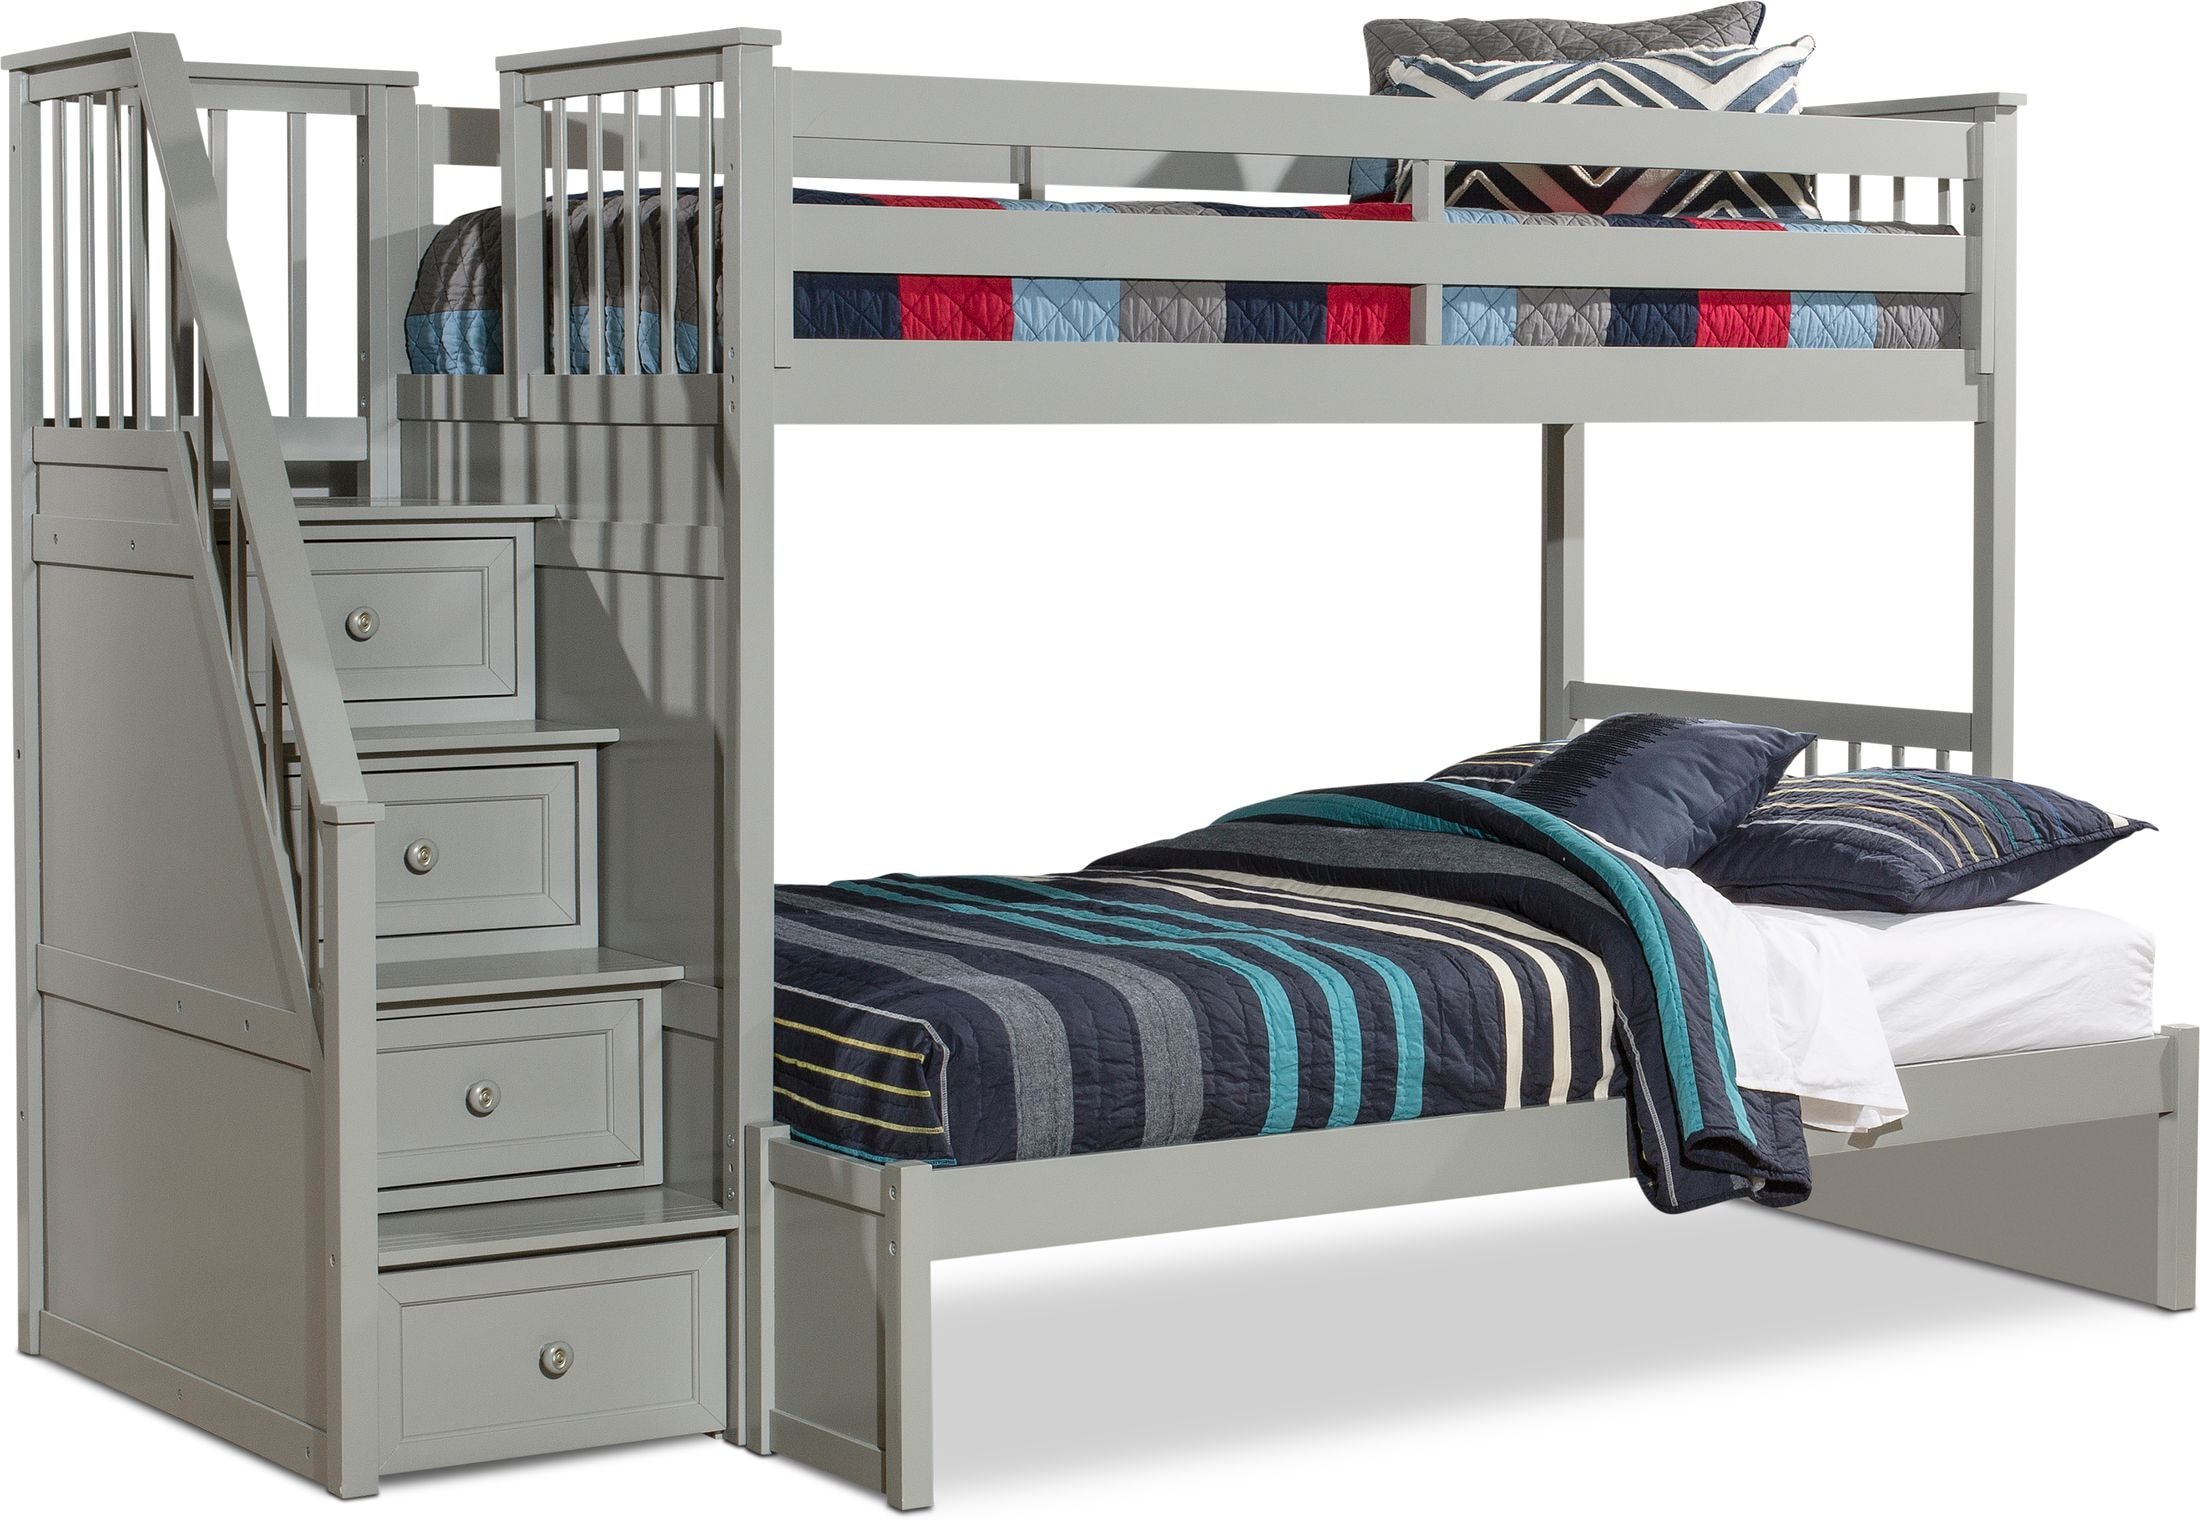 Undefined Value City Furniture, Gray Bunk Beds